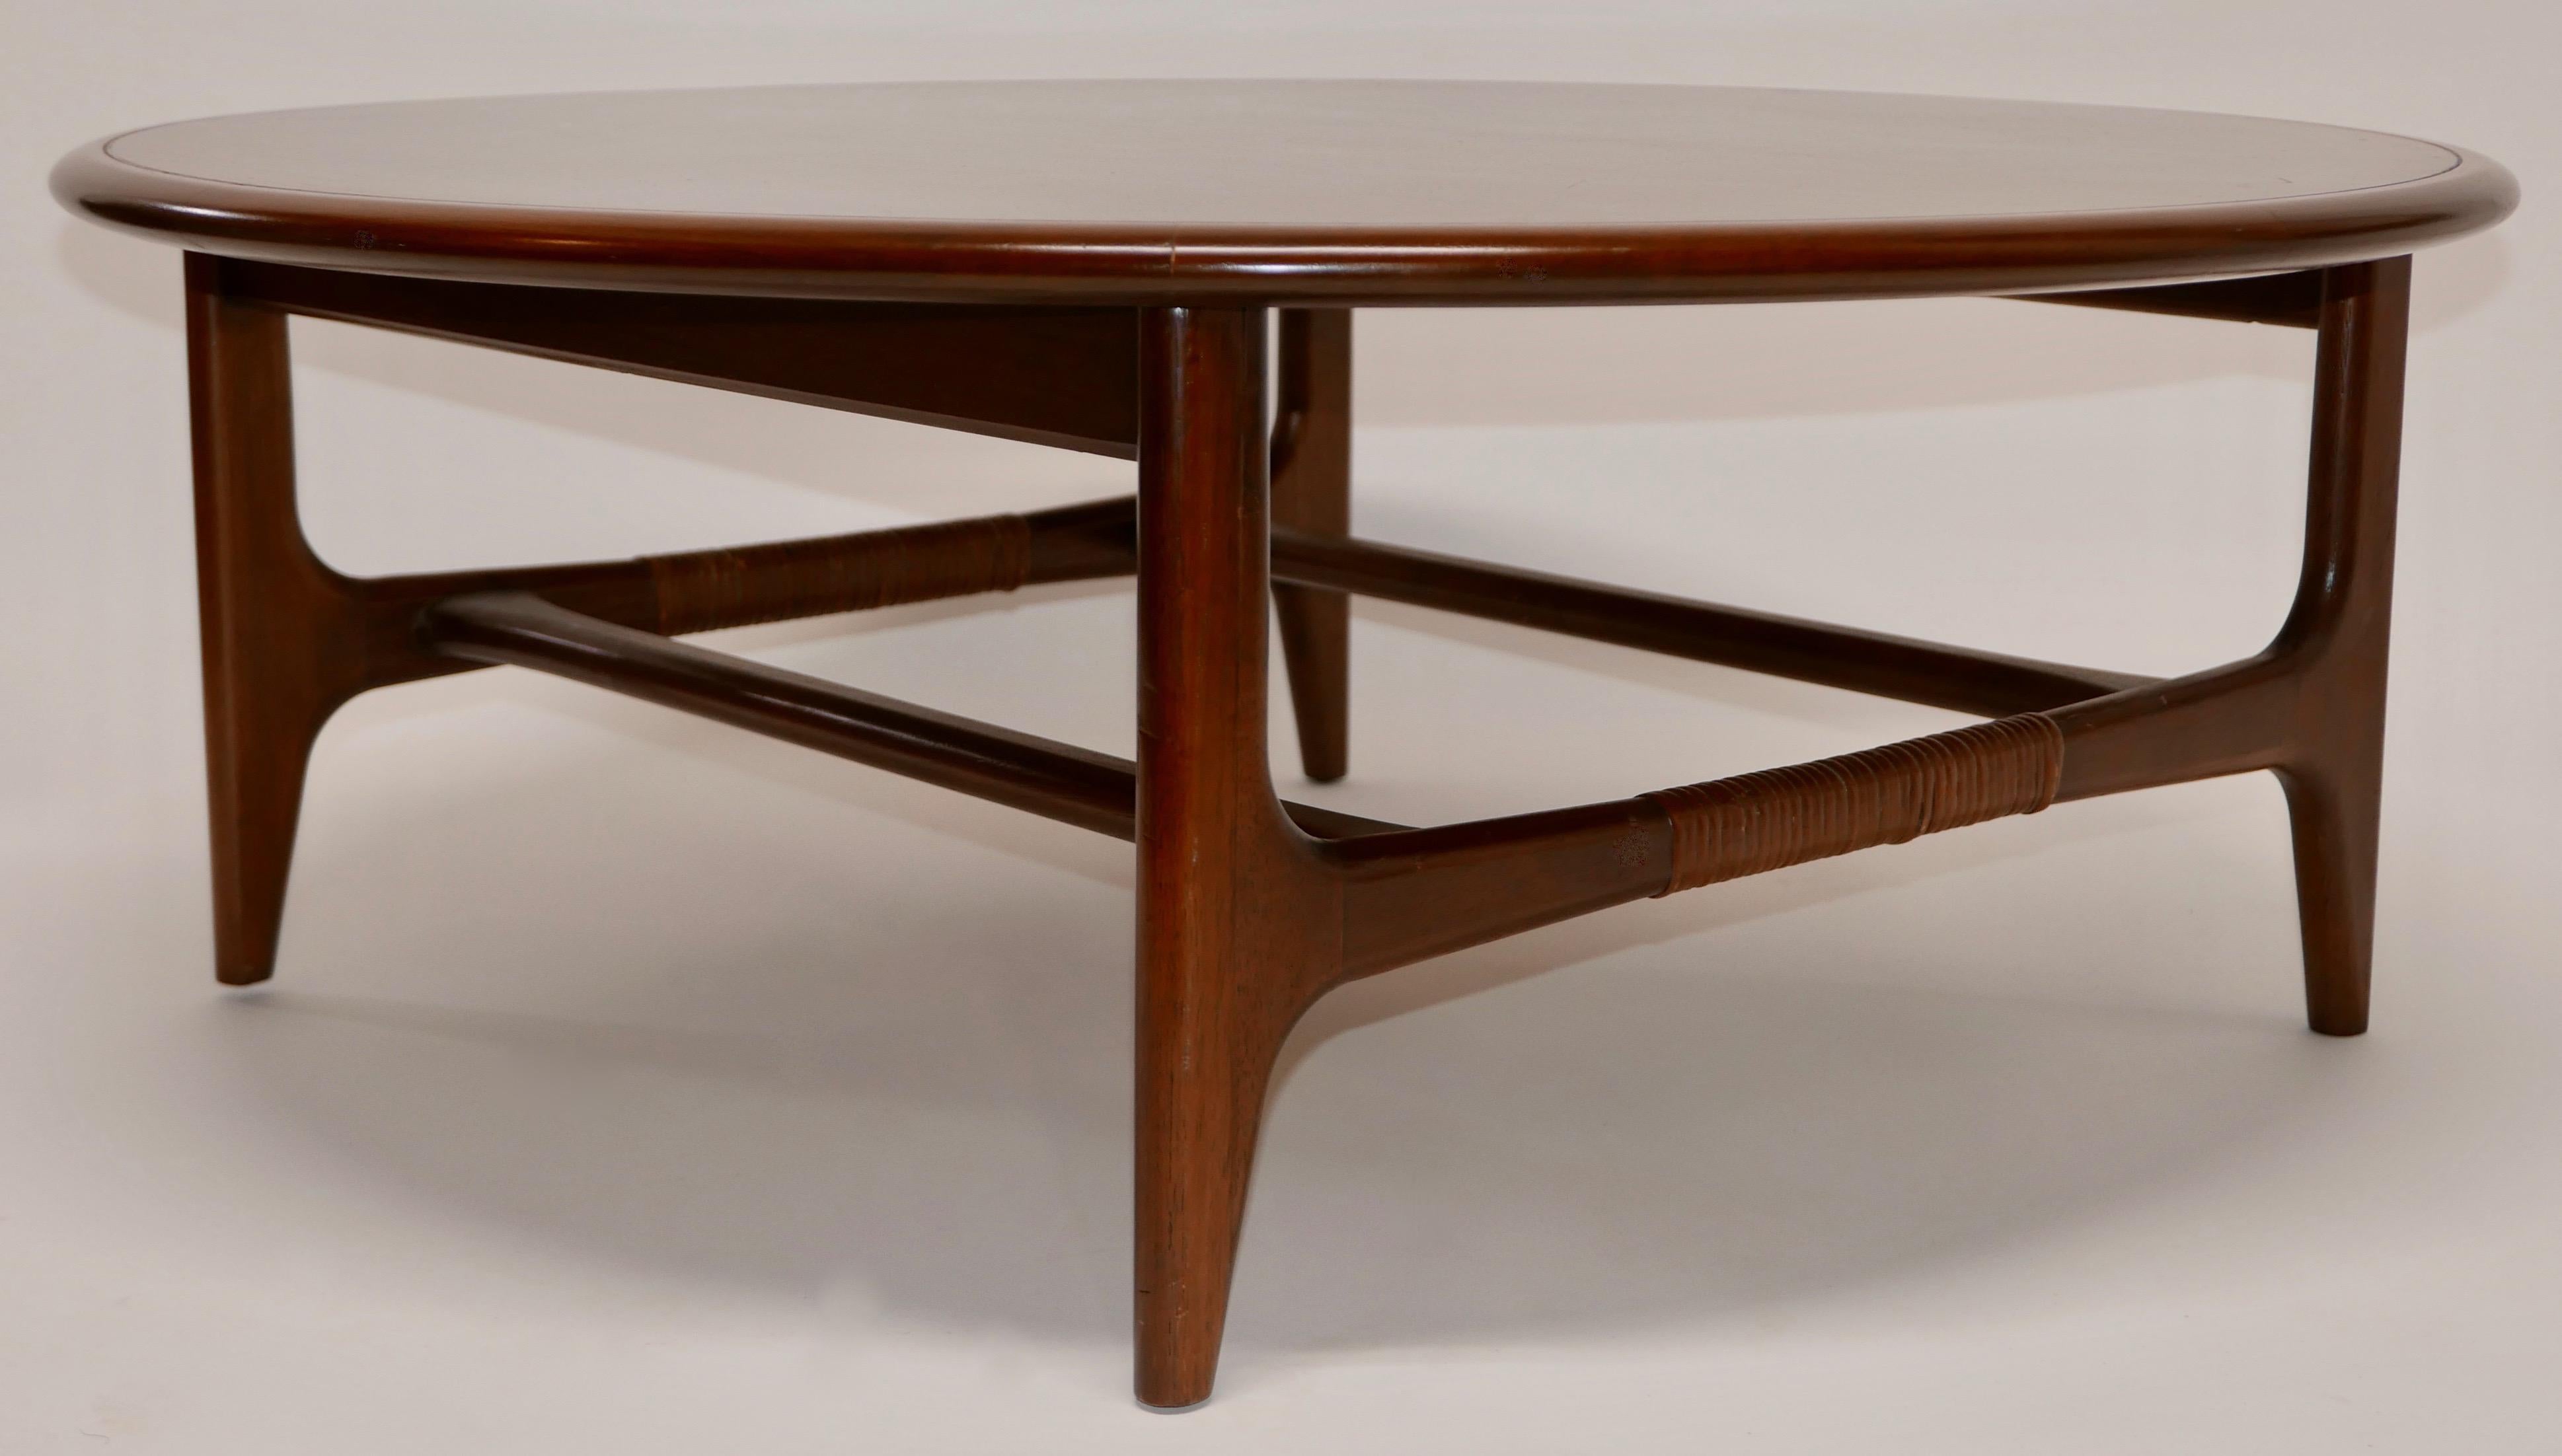 Fantastic Mid-Century Modern, round coffee table by Lane, Altavista, Virginia. This table has a round walnut top with a starburst wood inlay atop a contrasting square walnut base with woven detail.
American, circa 1962.